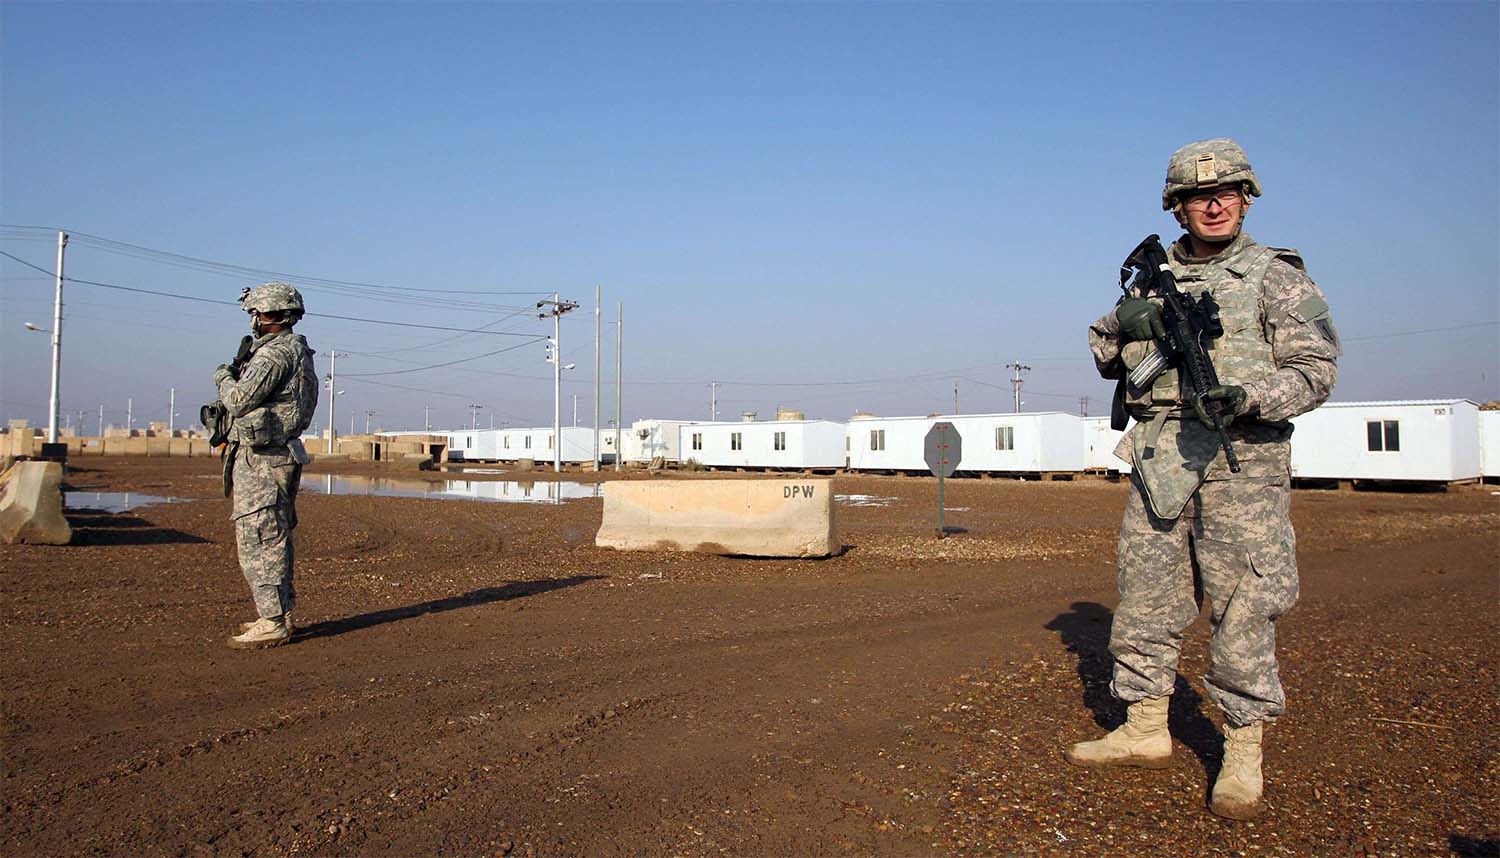 Taji base complex hosts Iraqi and US troops and is located thirty kilometres north of the capital Baghdad